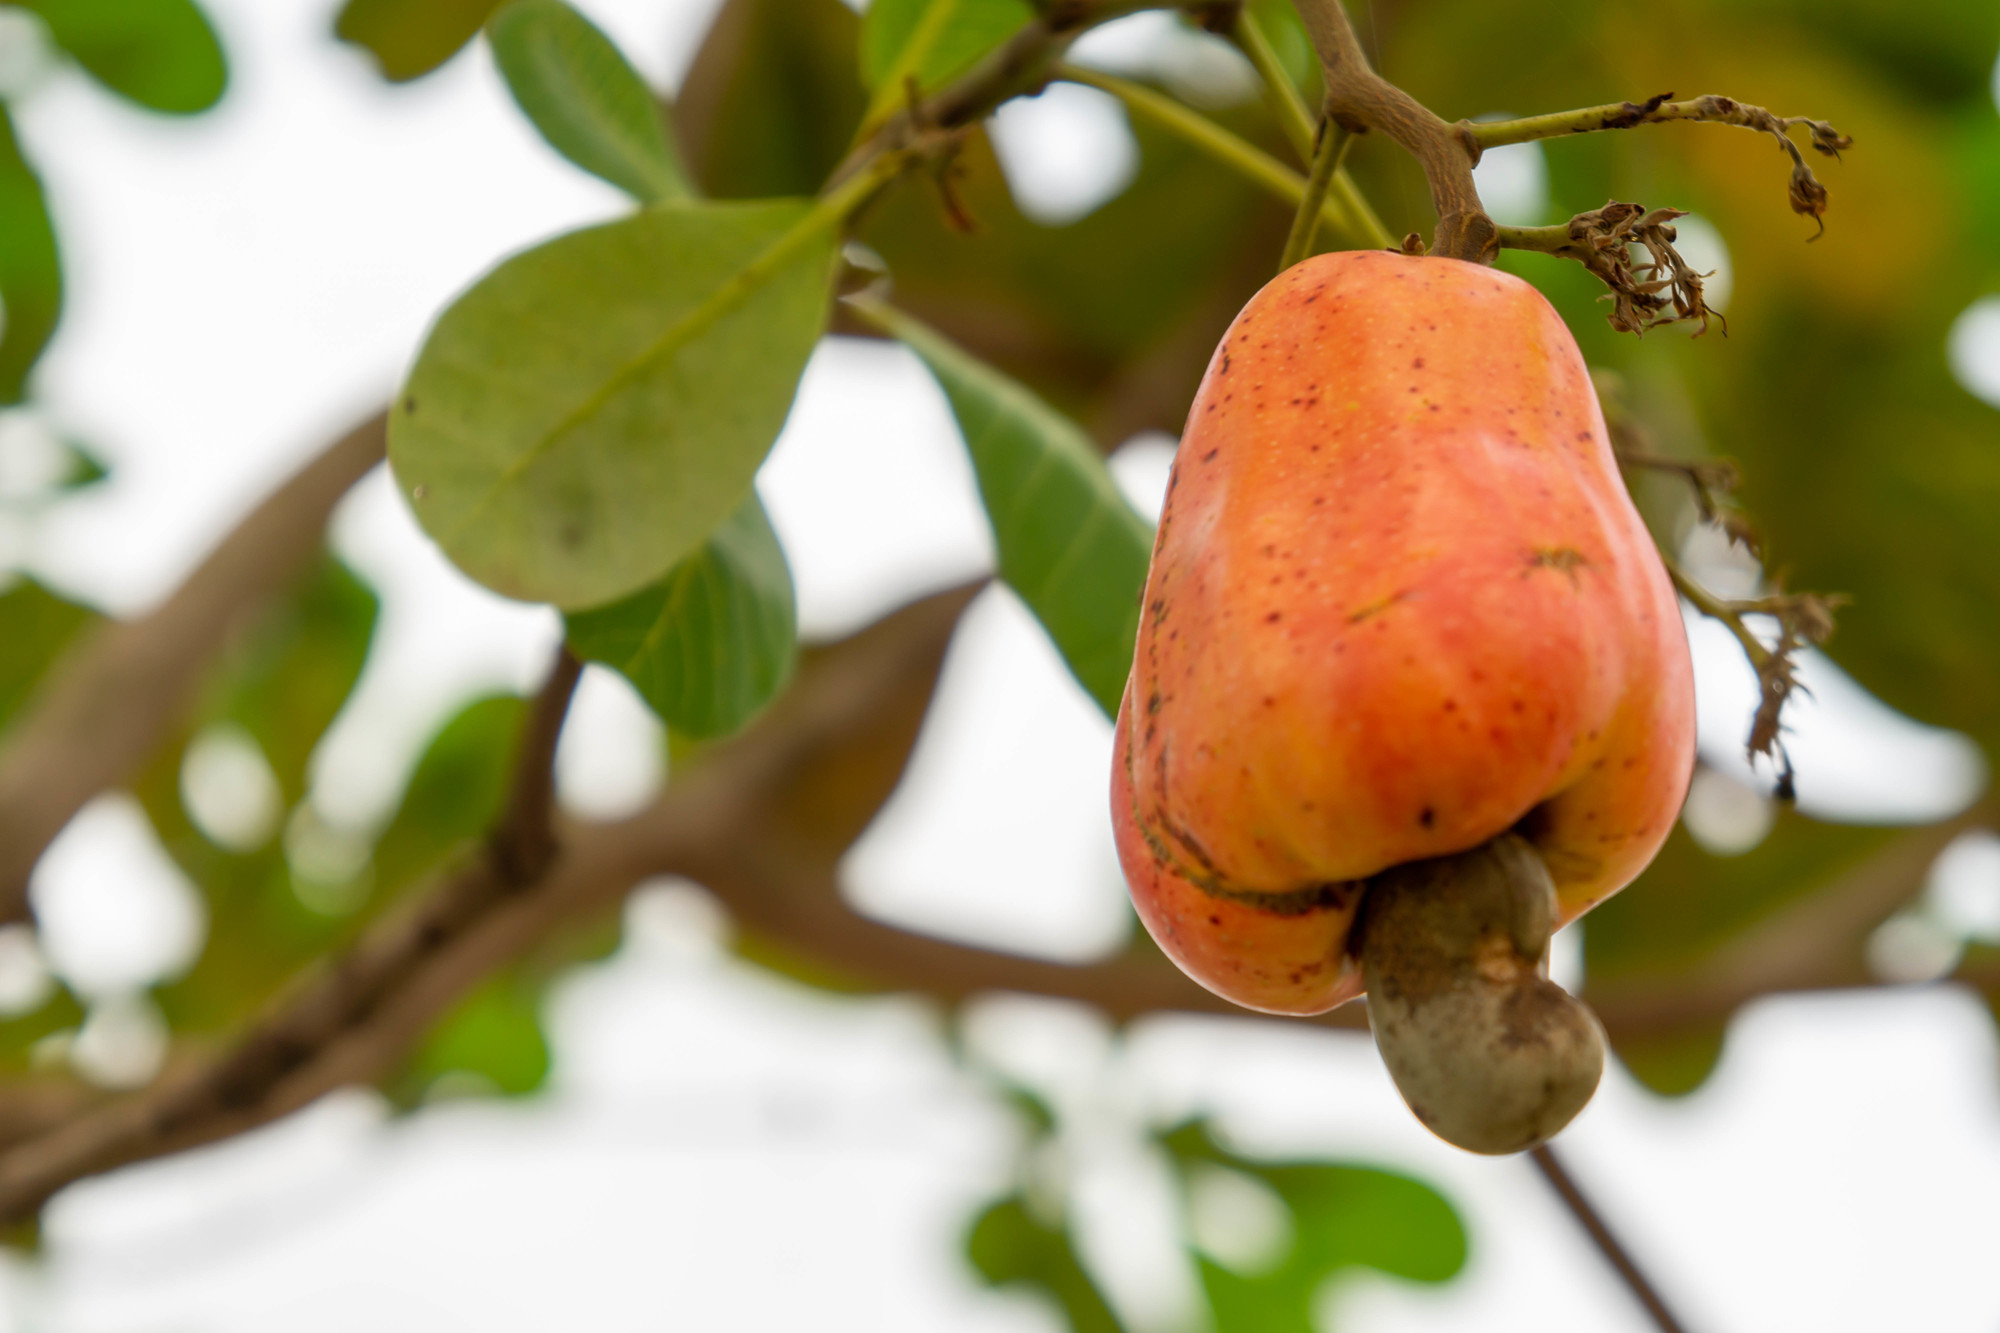 Anacardium occidentale or Cashews on the tree are fruits that use seeds for cooking by roasting.